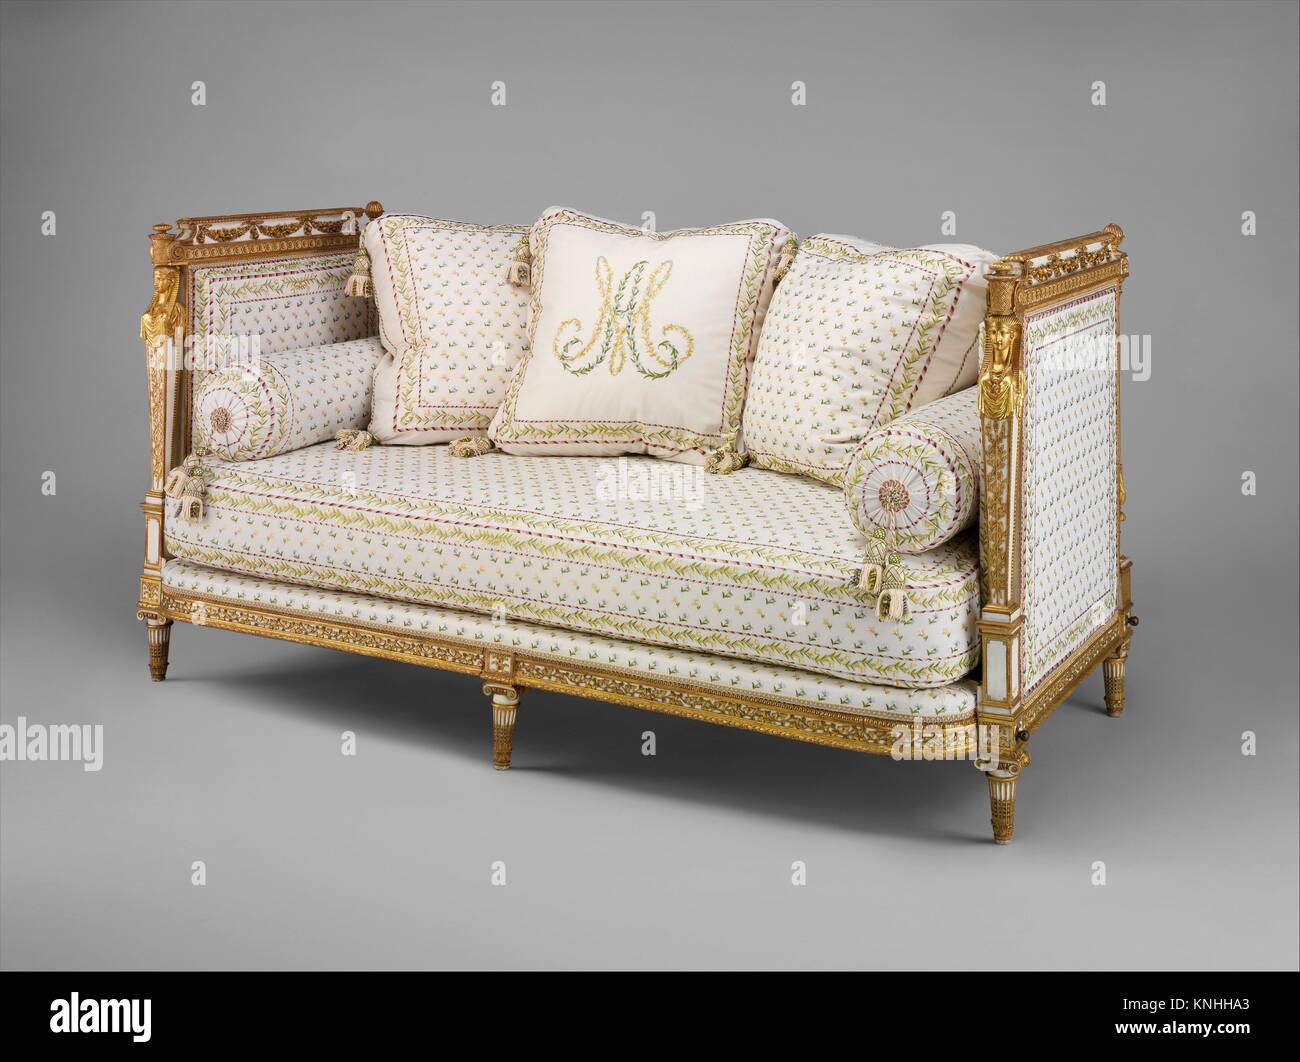 Daybed (Lit de repos or sultane) (part of a set). Maker: Jean-Baptiste-Claude Sené (1748-1803); Maker: painted and gilded by Louis-François Chatard Stock Photo